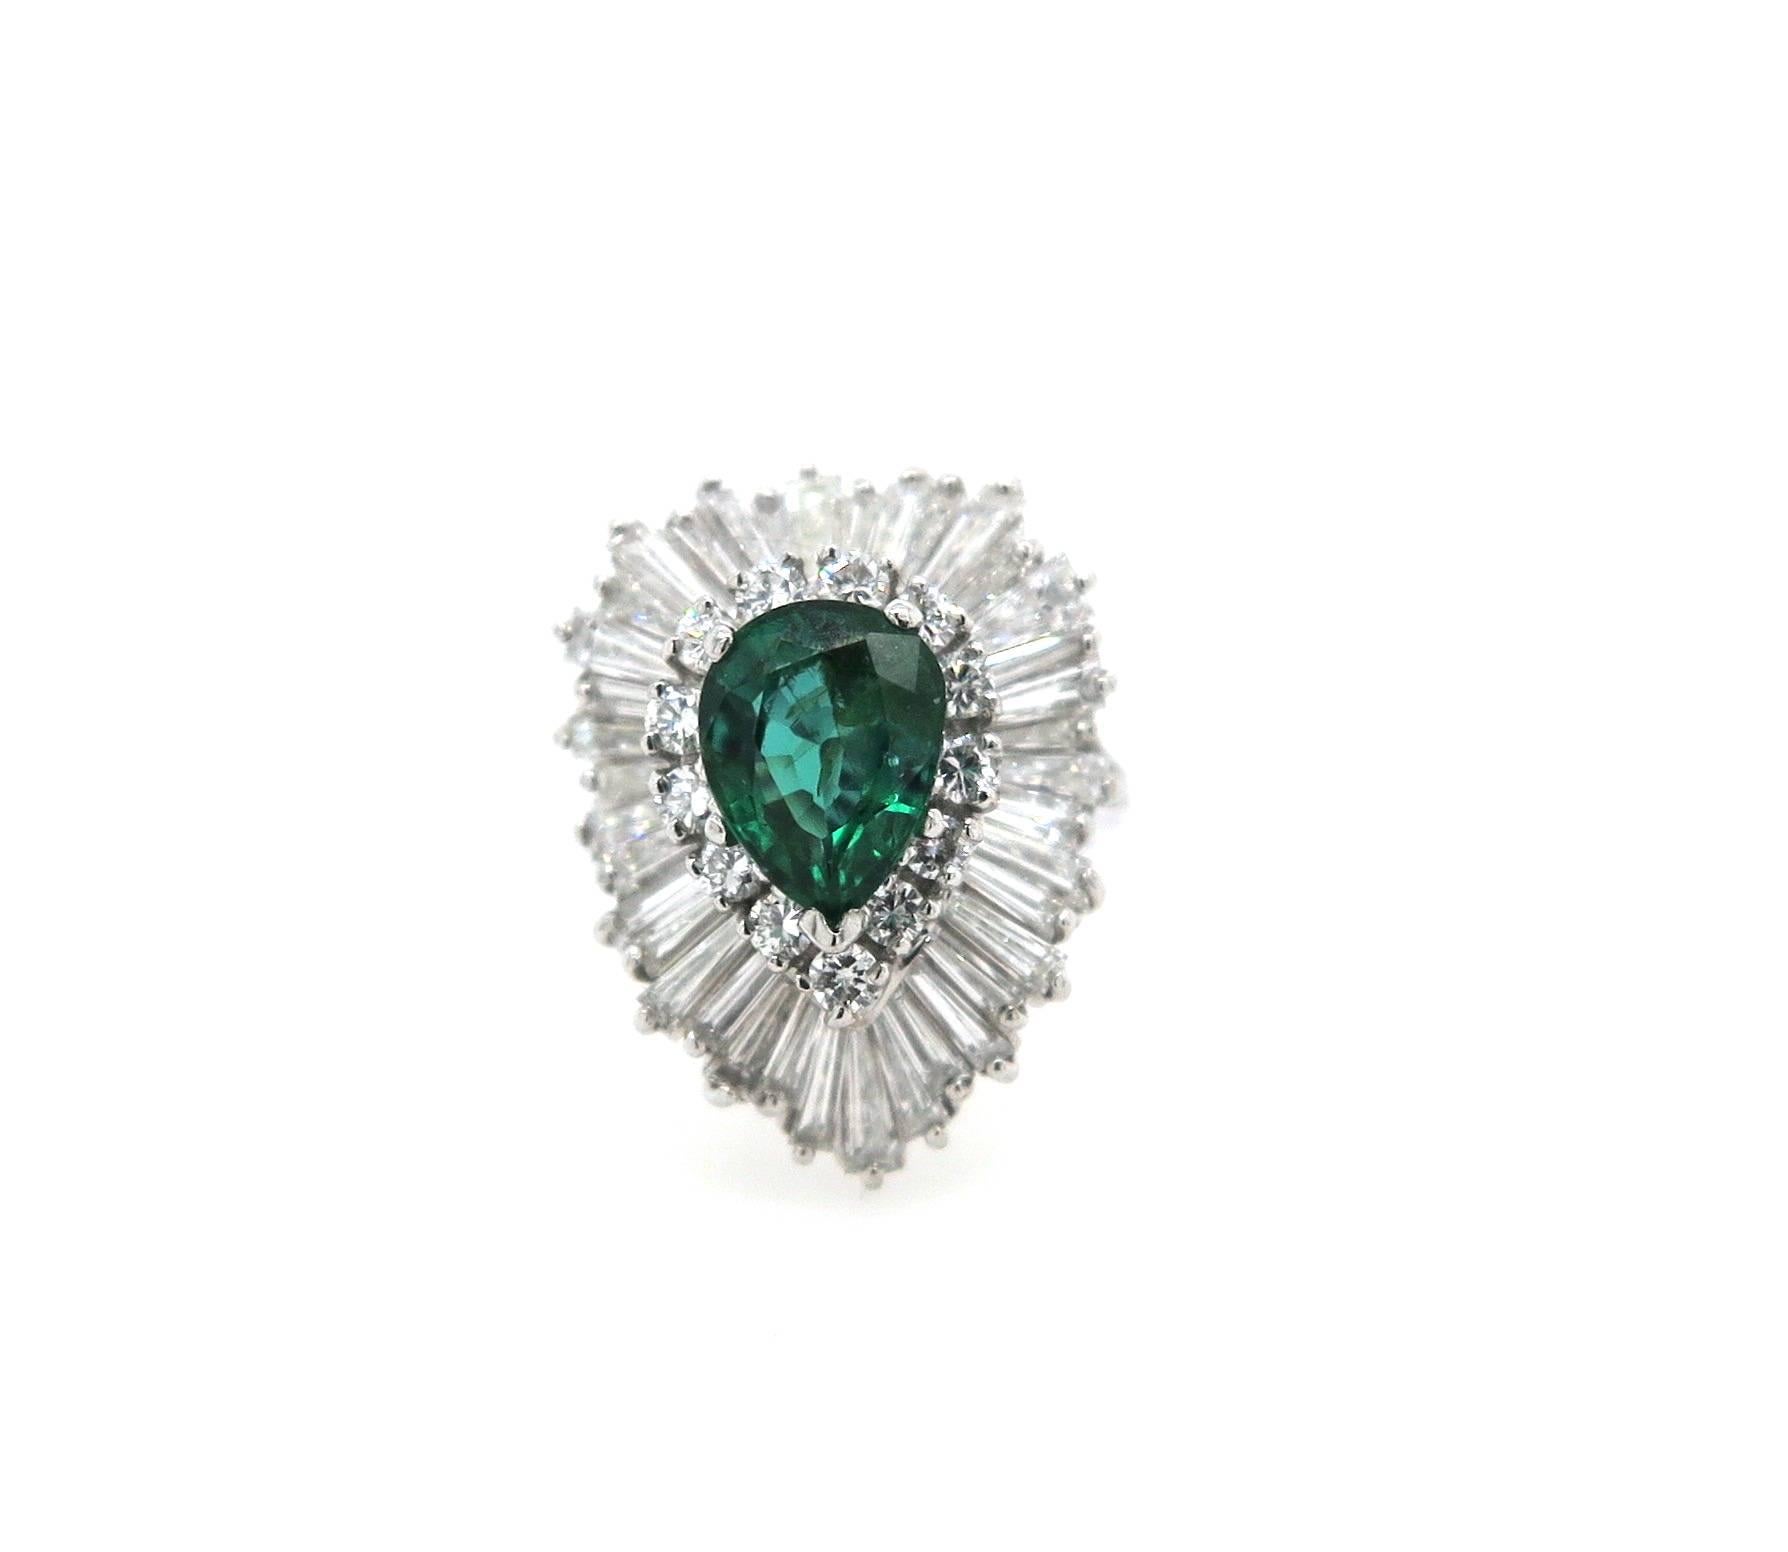 Featuring a modern platinum dress ring claw set with a central pear shaped Colombian Emerald of 2.15 carats surrounded in two tiers with 13 Round Brilliant Cut Diamonds and 38 Tapered Baguette cut diamonds. The ring has a rounded shank of 2.2mm